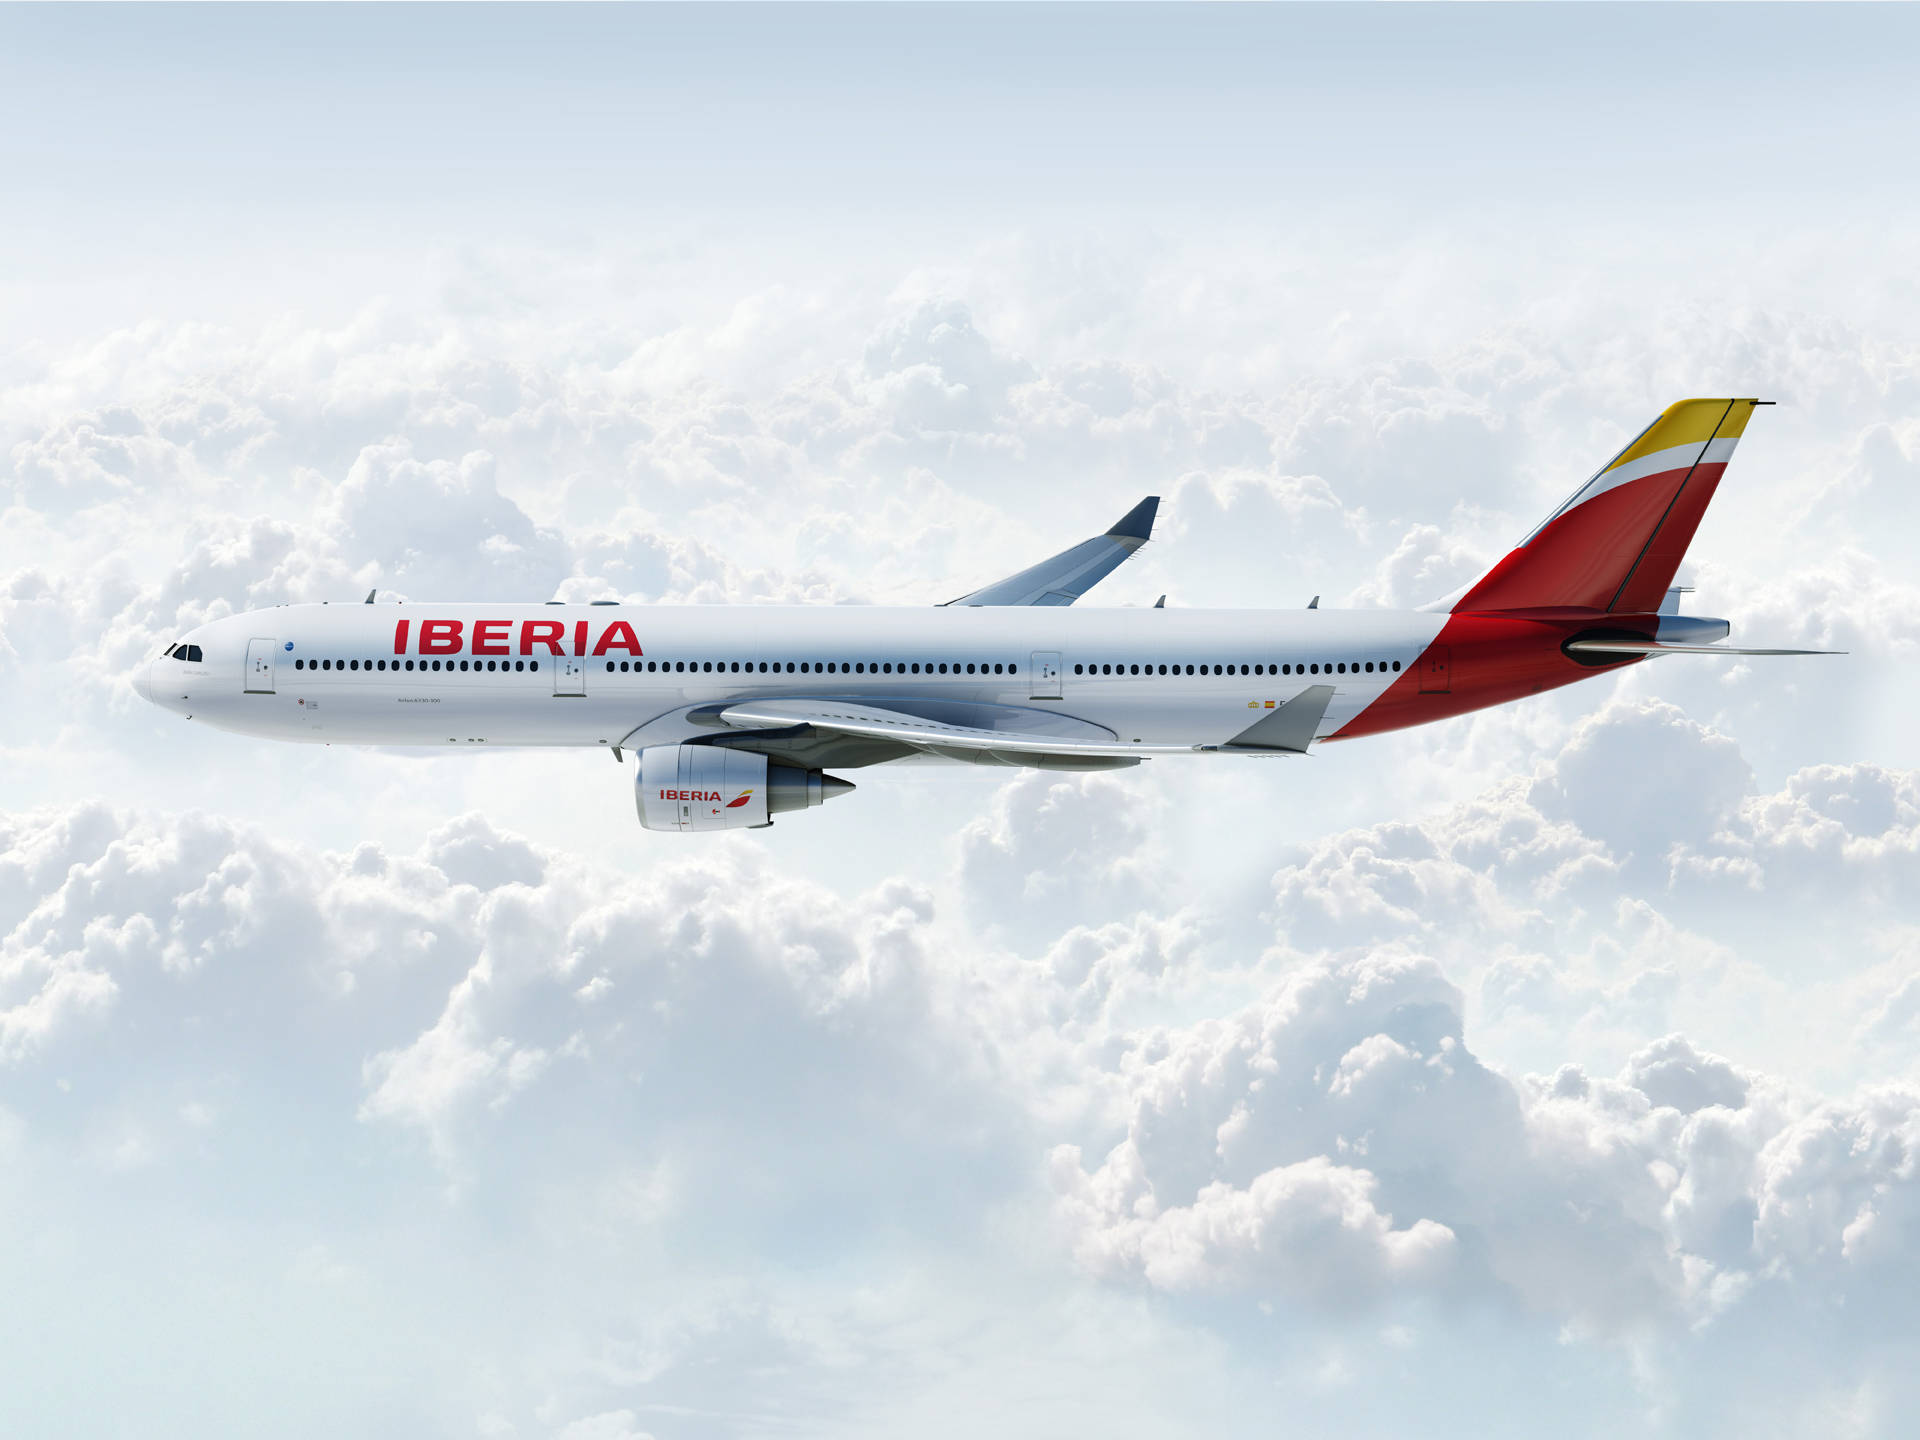 Iberia Airlines Airplane White Cloudy Skies Wallpaper